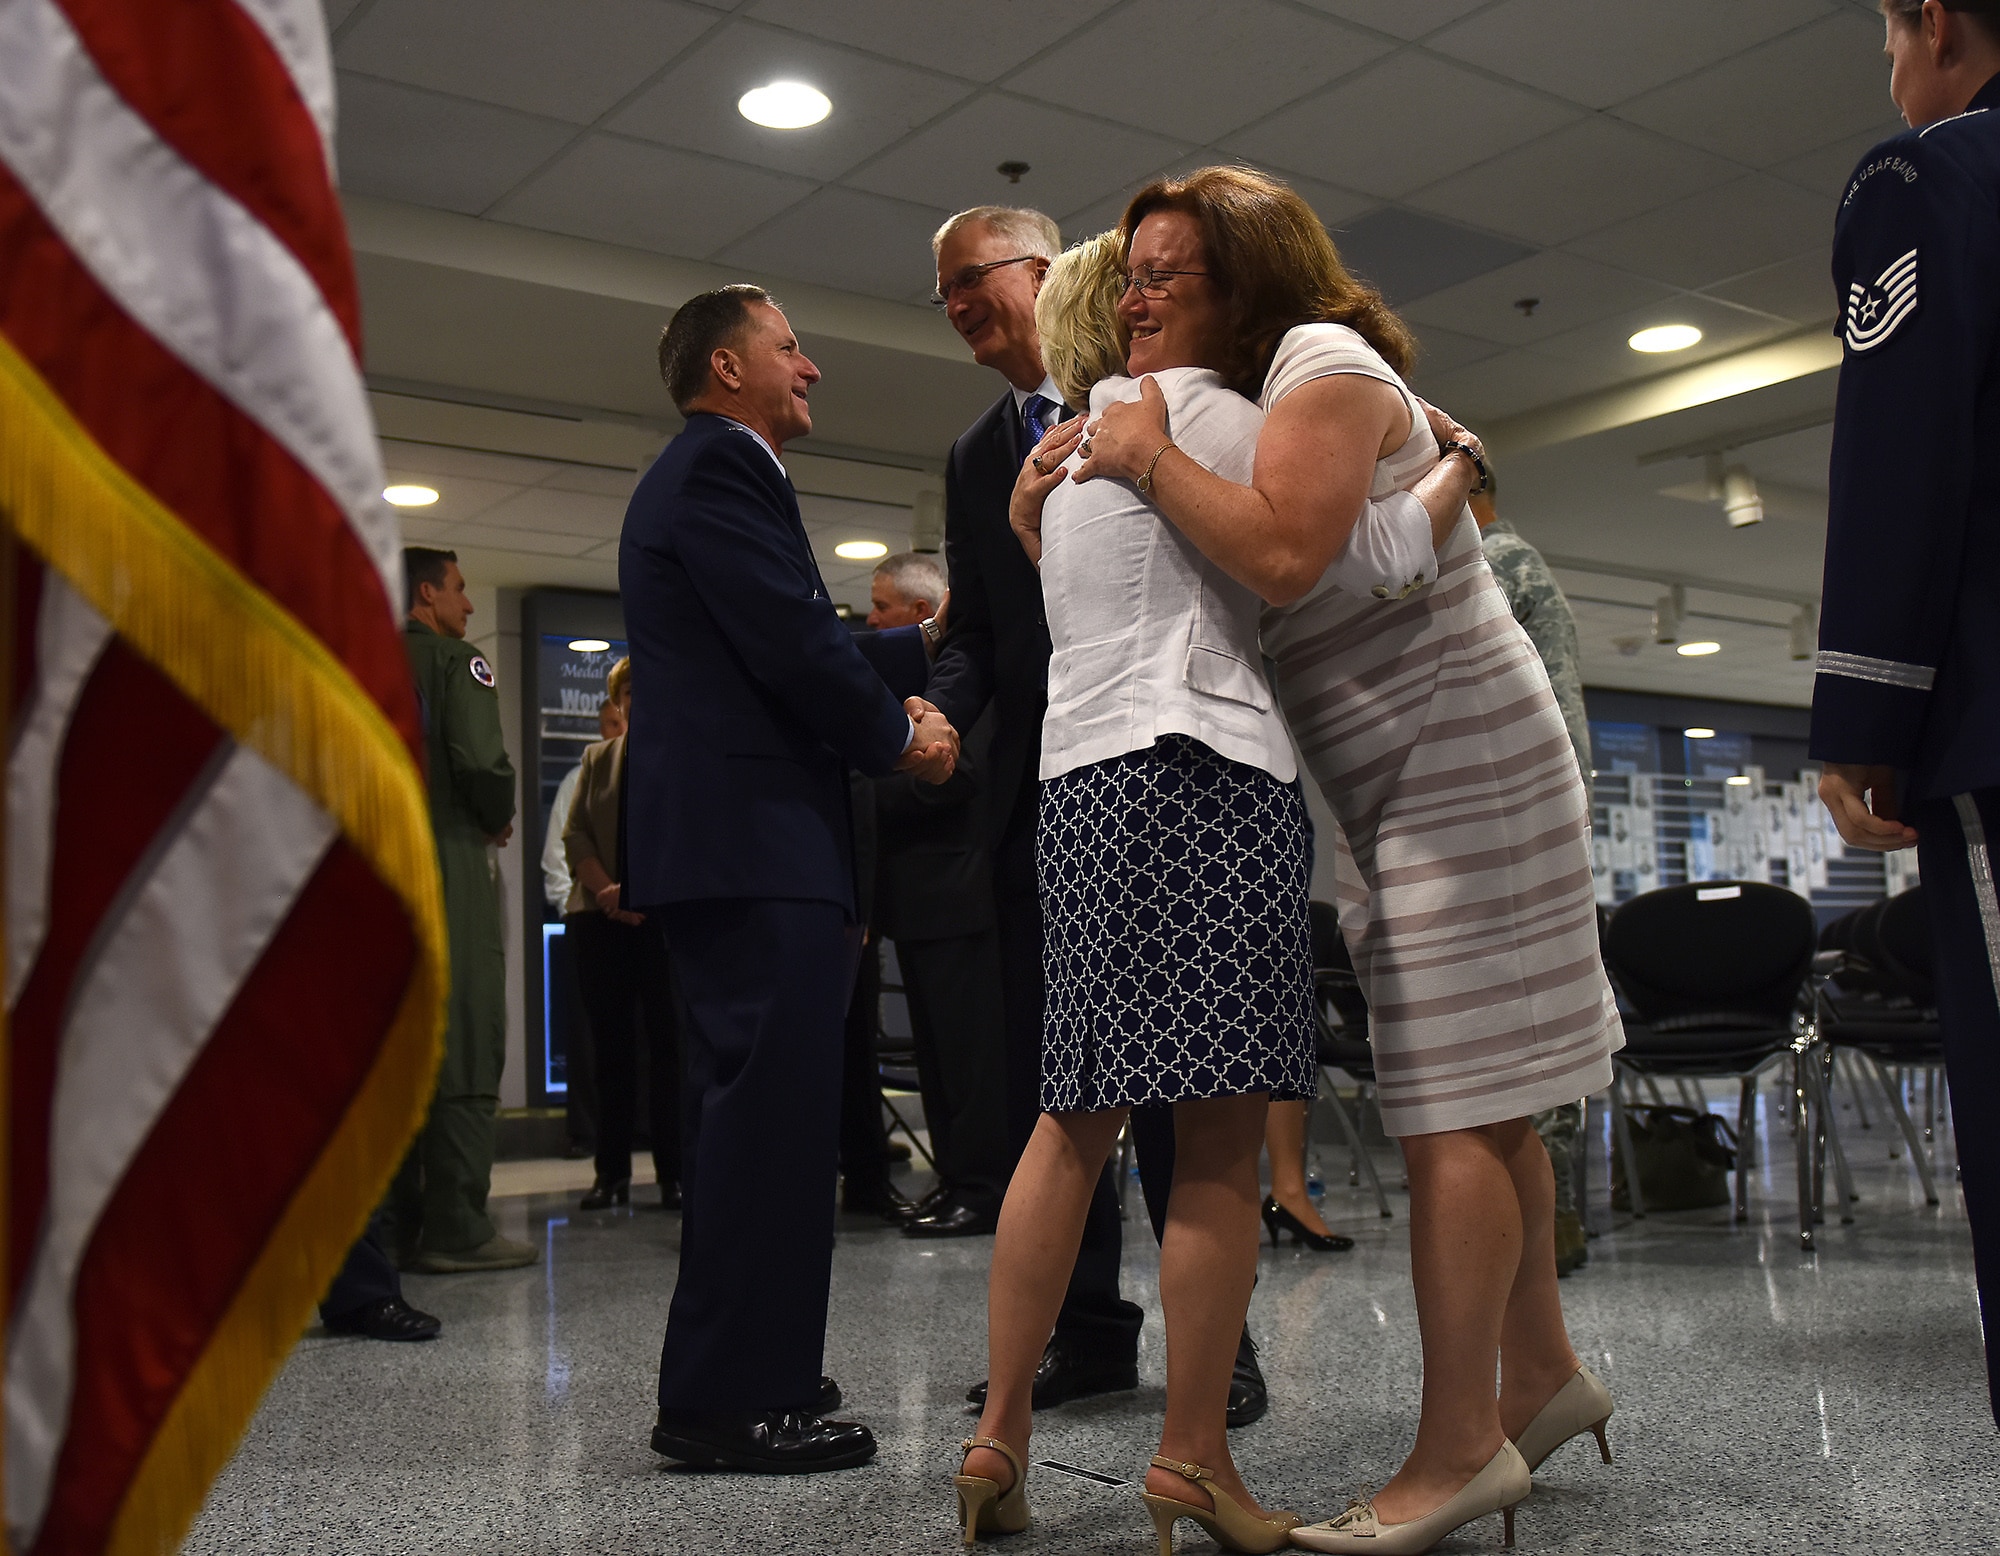 Air Force Chief of Staff Gen. David L. Goldfein and his wife, Dawn, shake hands and give hugs to well-wishers after Goldfein's swearing-in ceremony at the Pentagon in Washington, D.C., June 1, 2016. Goldfein became the 21st chief of staff of the Air Force. (U.S. Air Force photo/Tech Sgt. Dan DeCook)